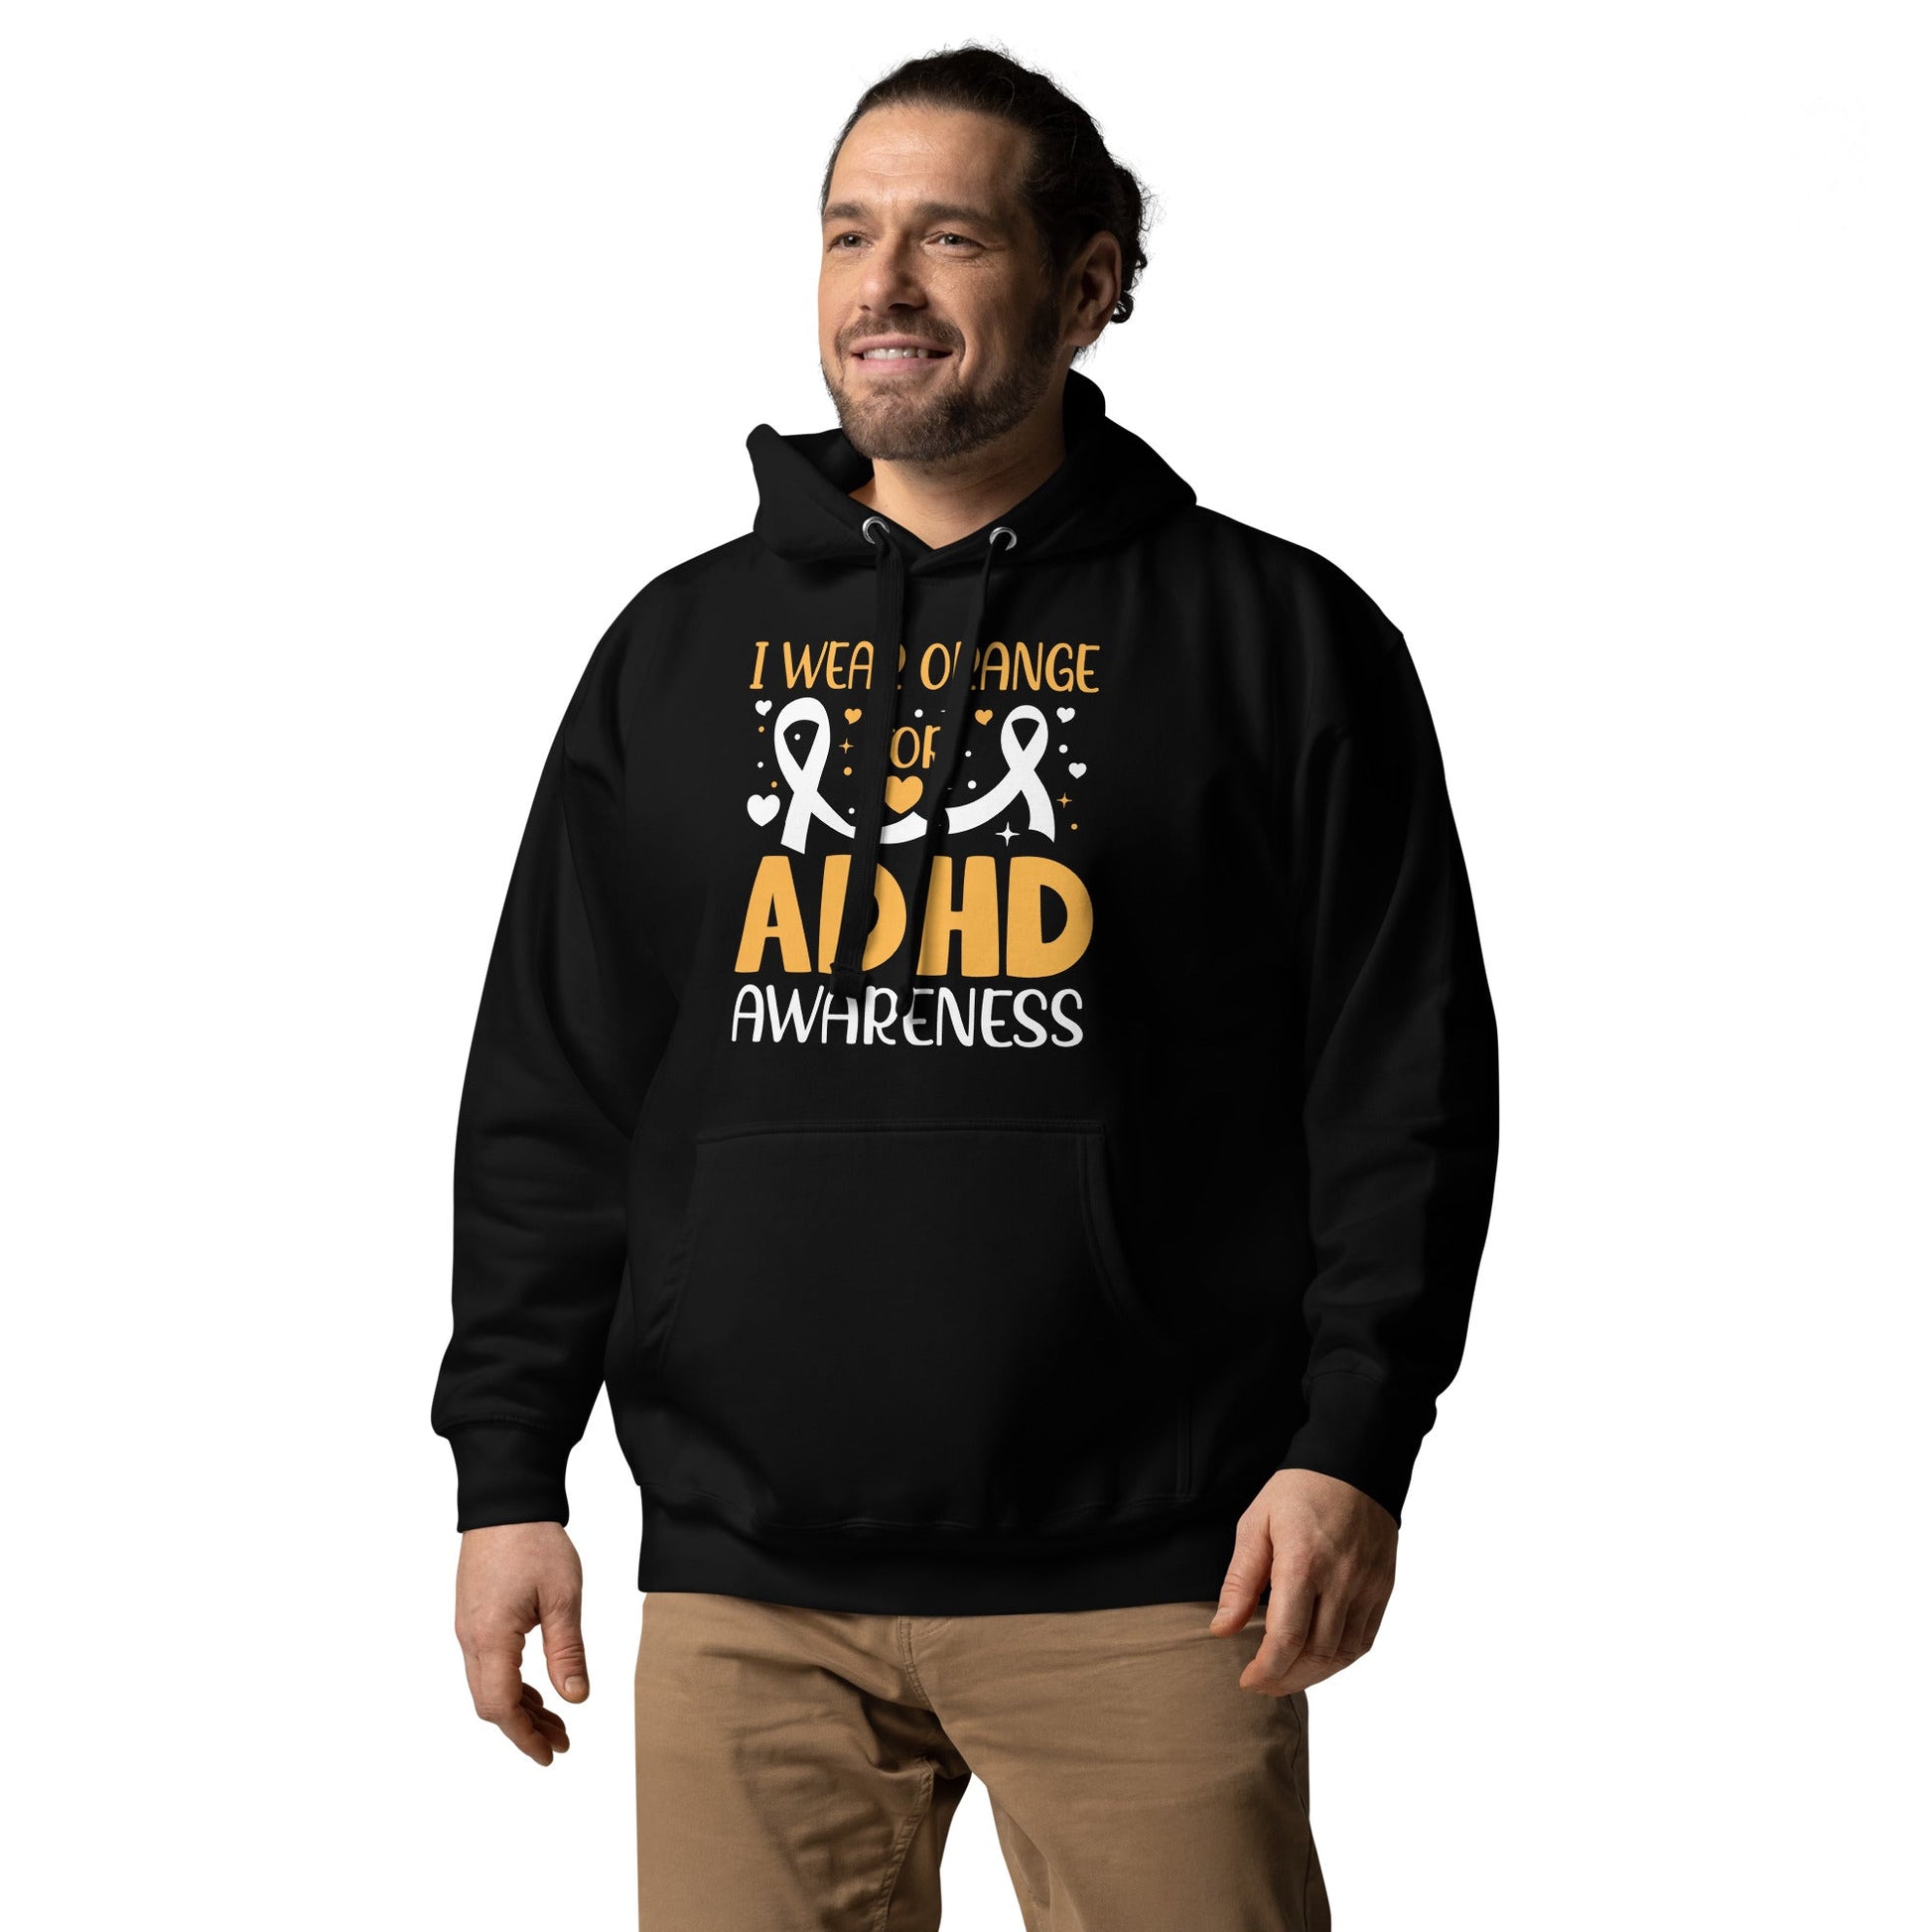 ADHD Awareness Unisex Hoodie - Uniquely Included